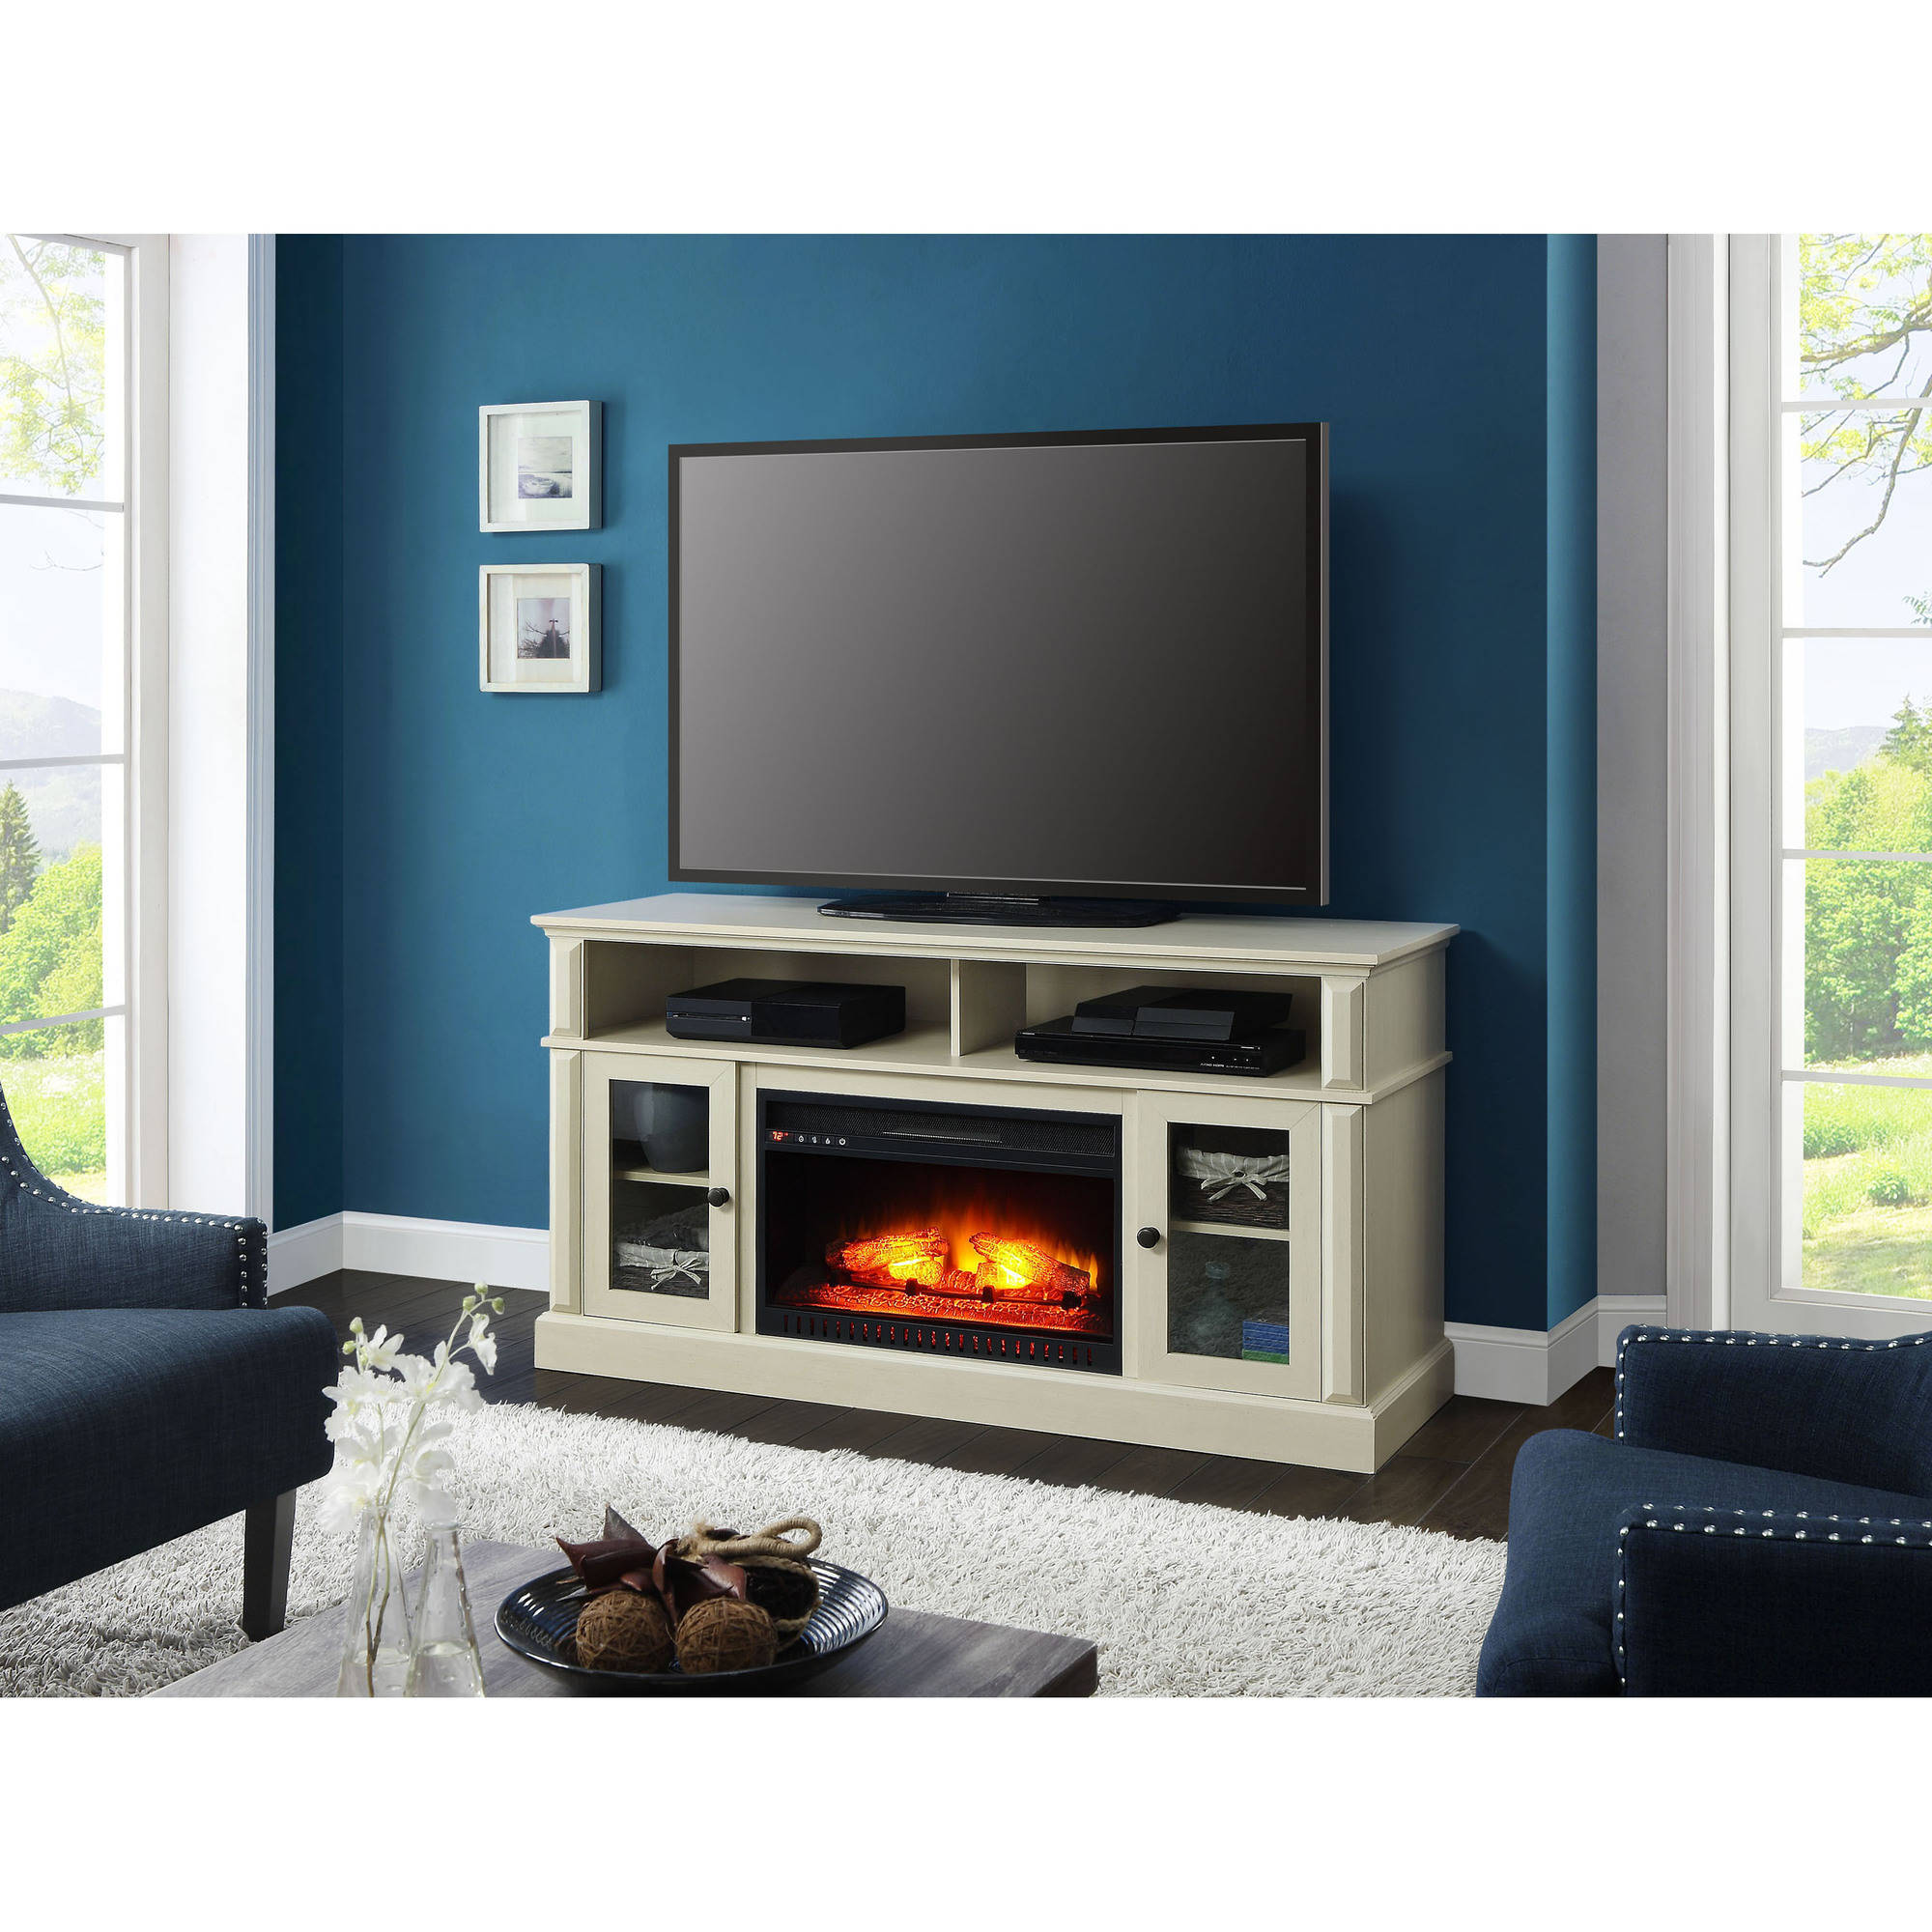 Fireplace Tv Stand for 60 Inch Tv Unique Whalen Barston Media Fireplace for Tv S Up to 70 Multiple